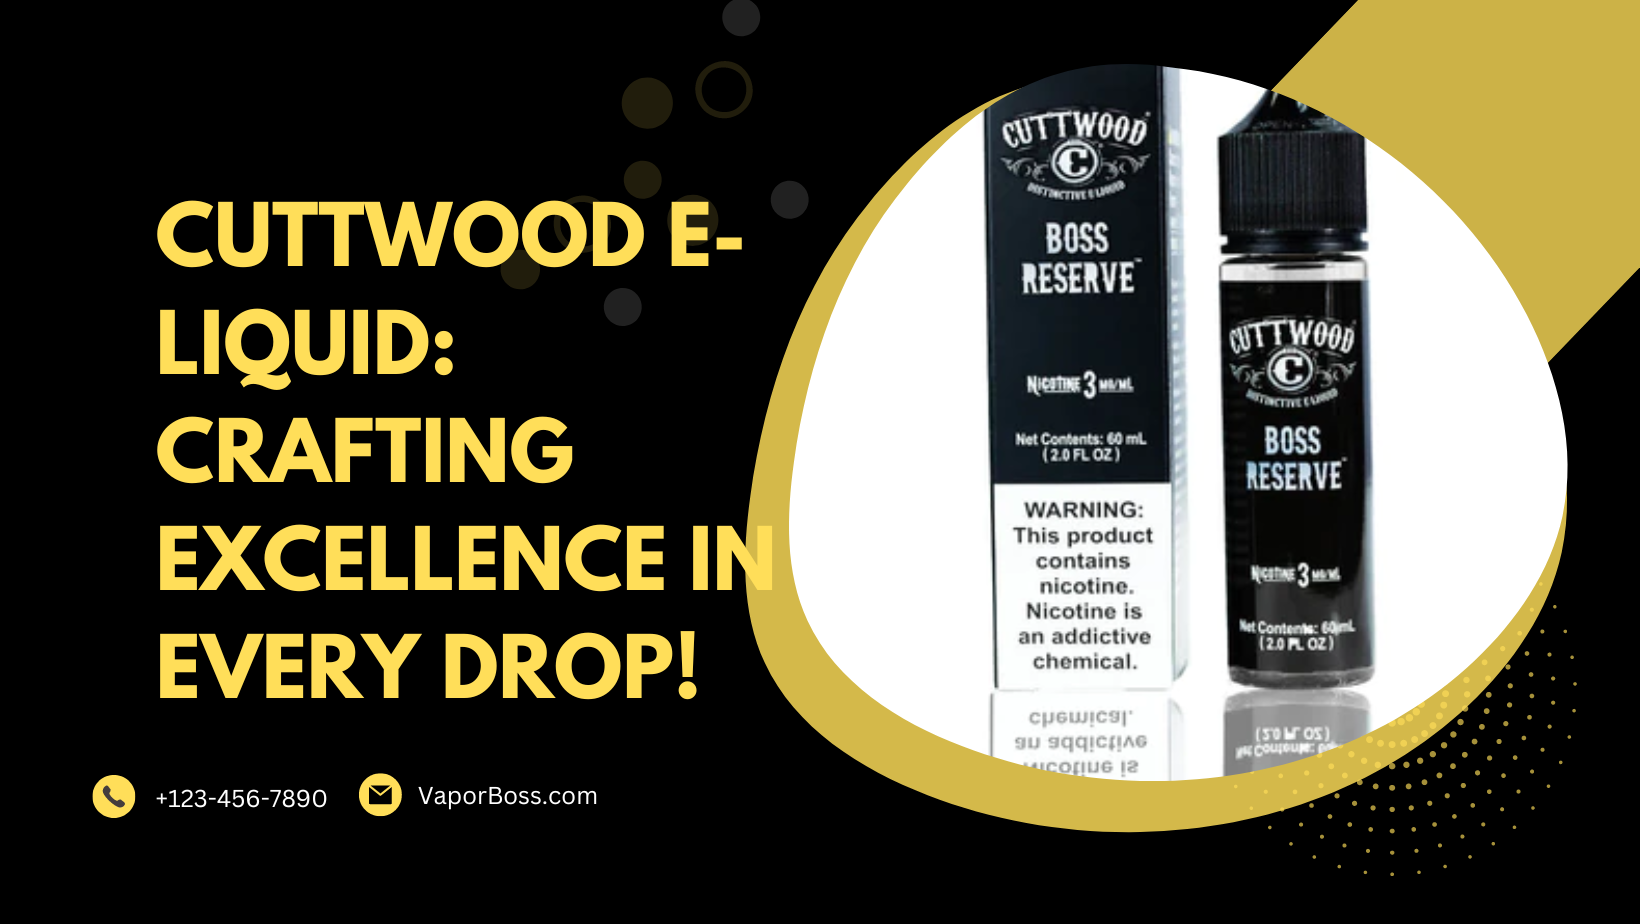 Cuttwood E-Liquid: Crafting Excellence in Every Drop!